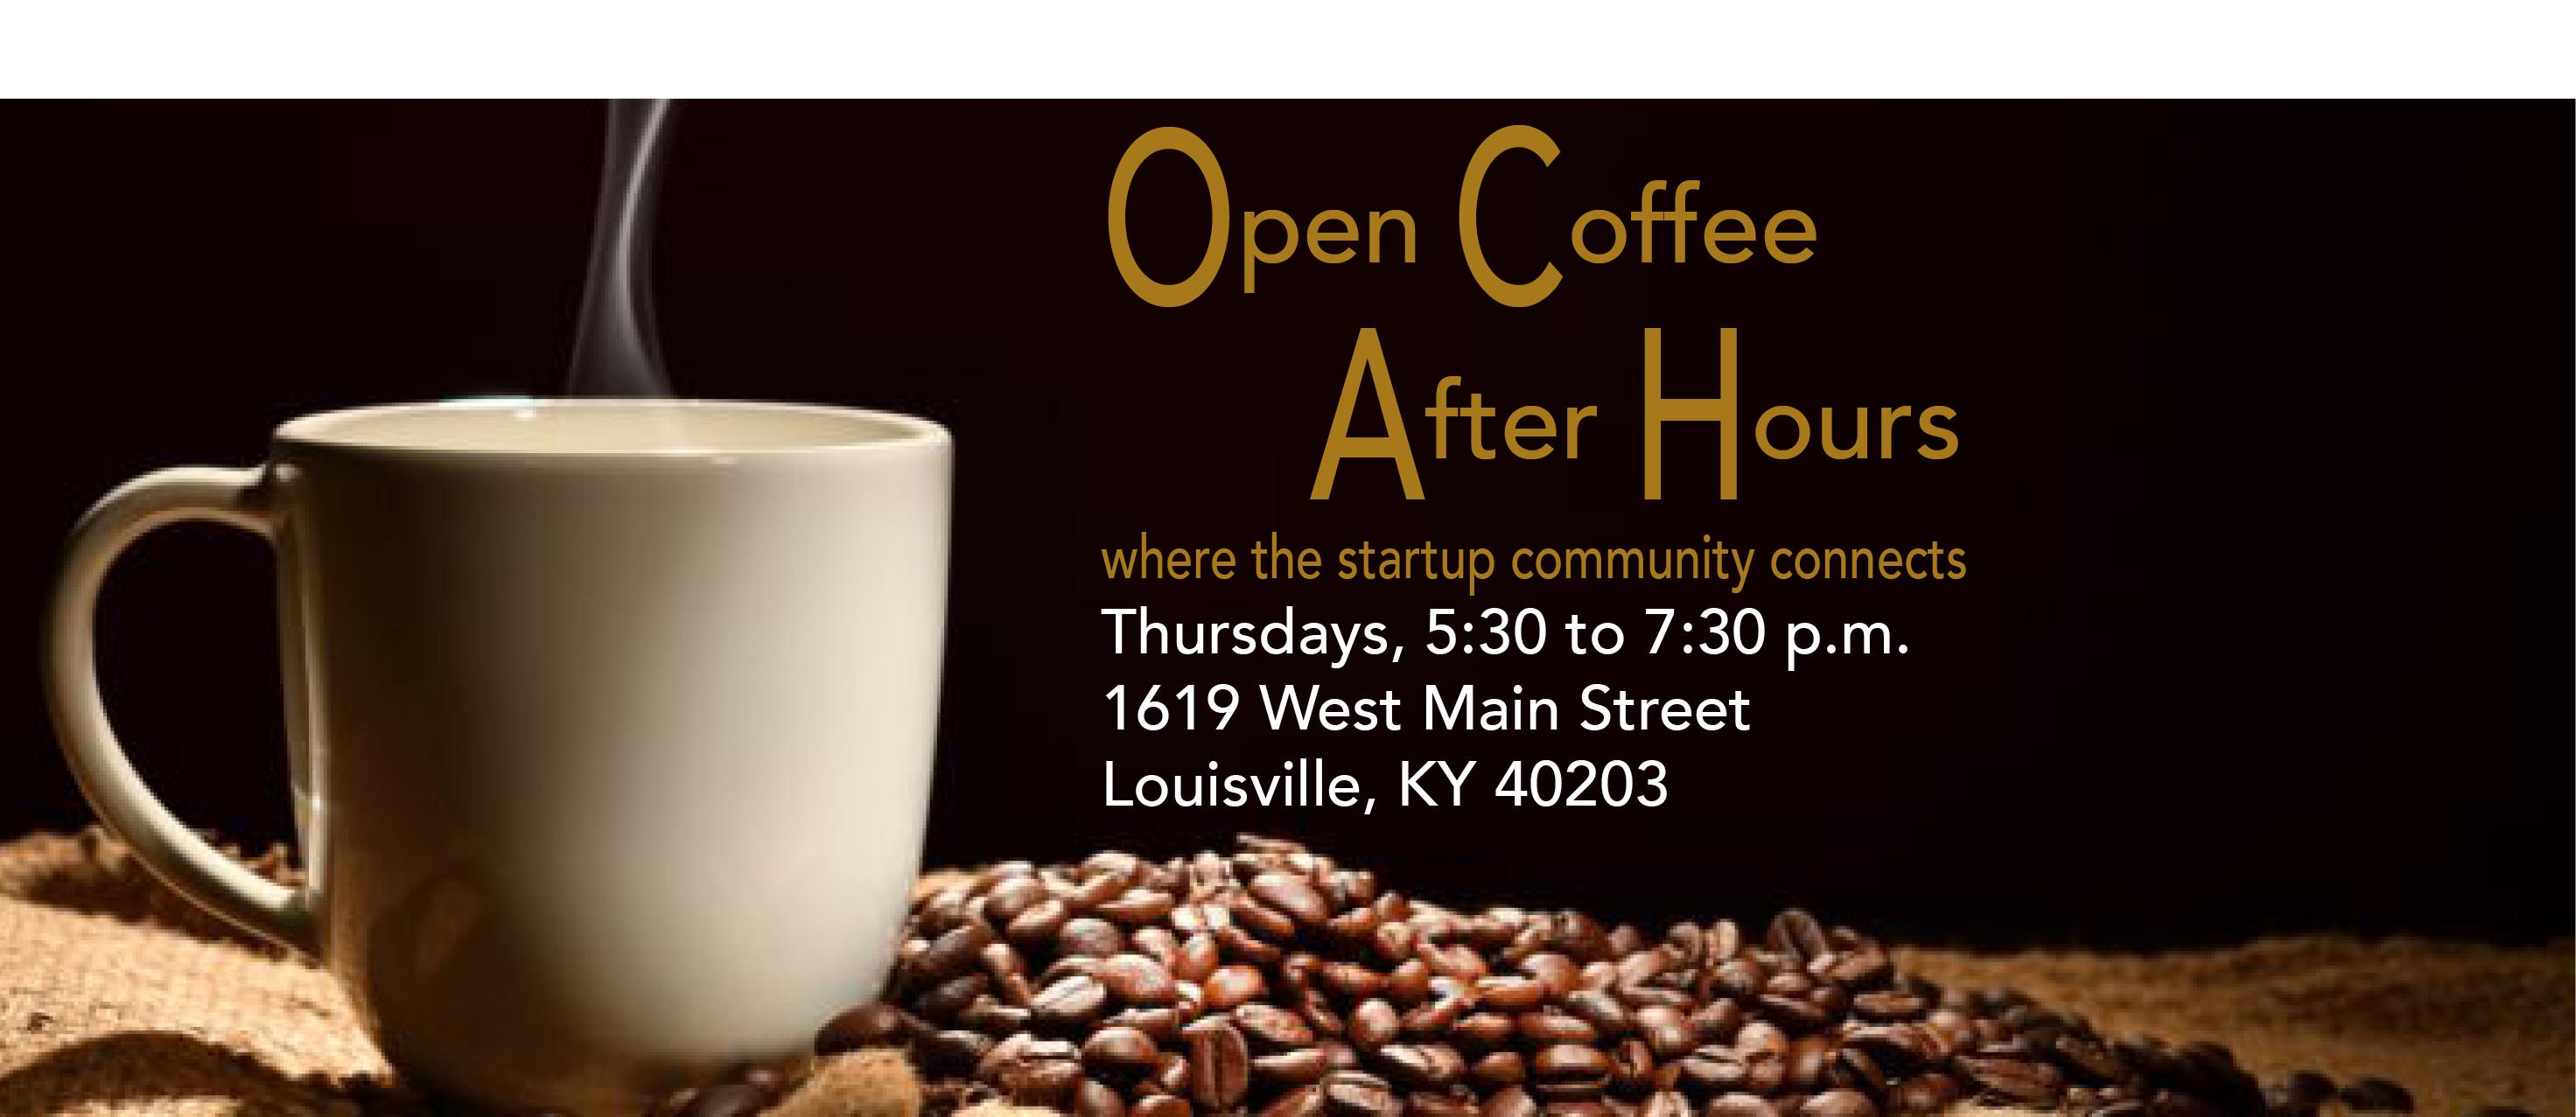 Open Coffee After Hours: Where the startup community connects